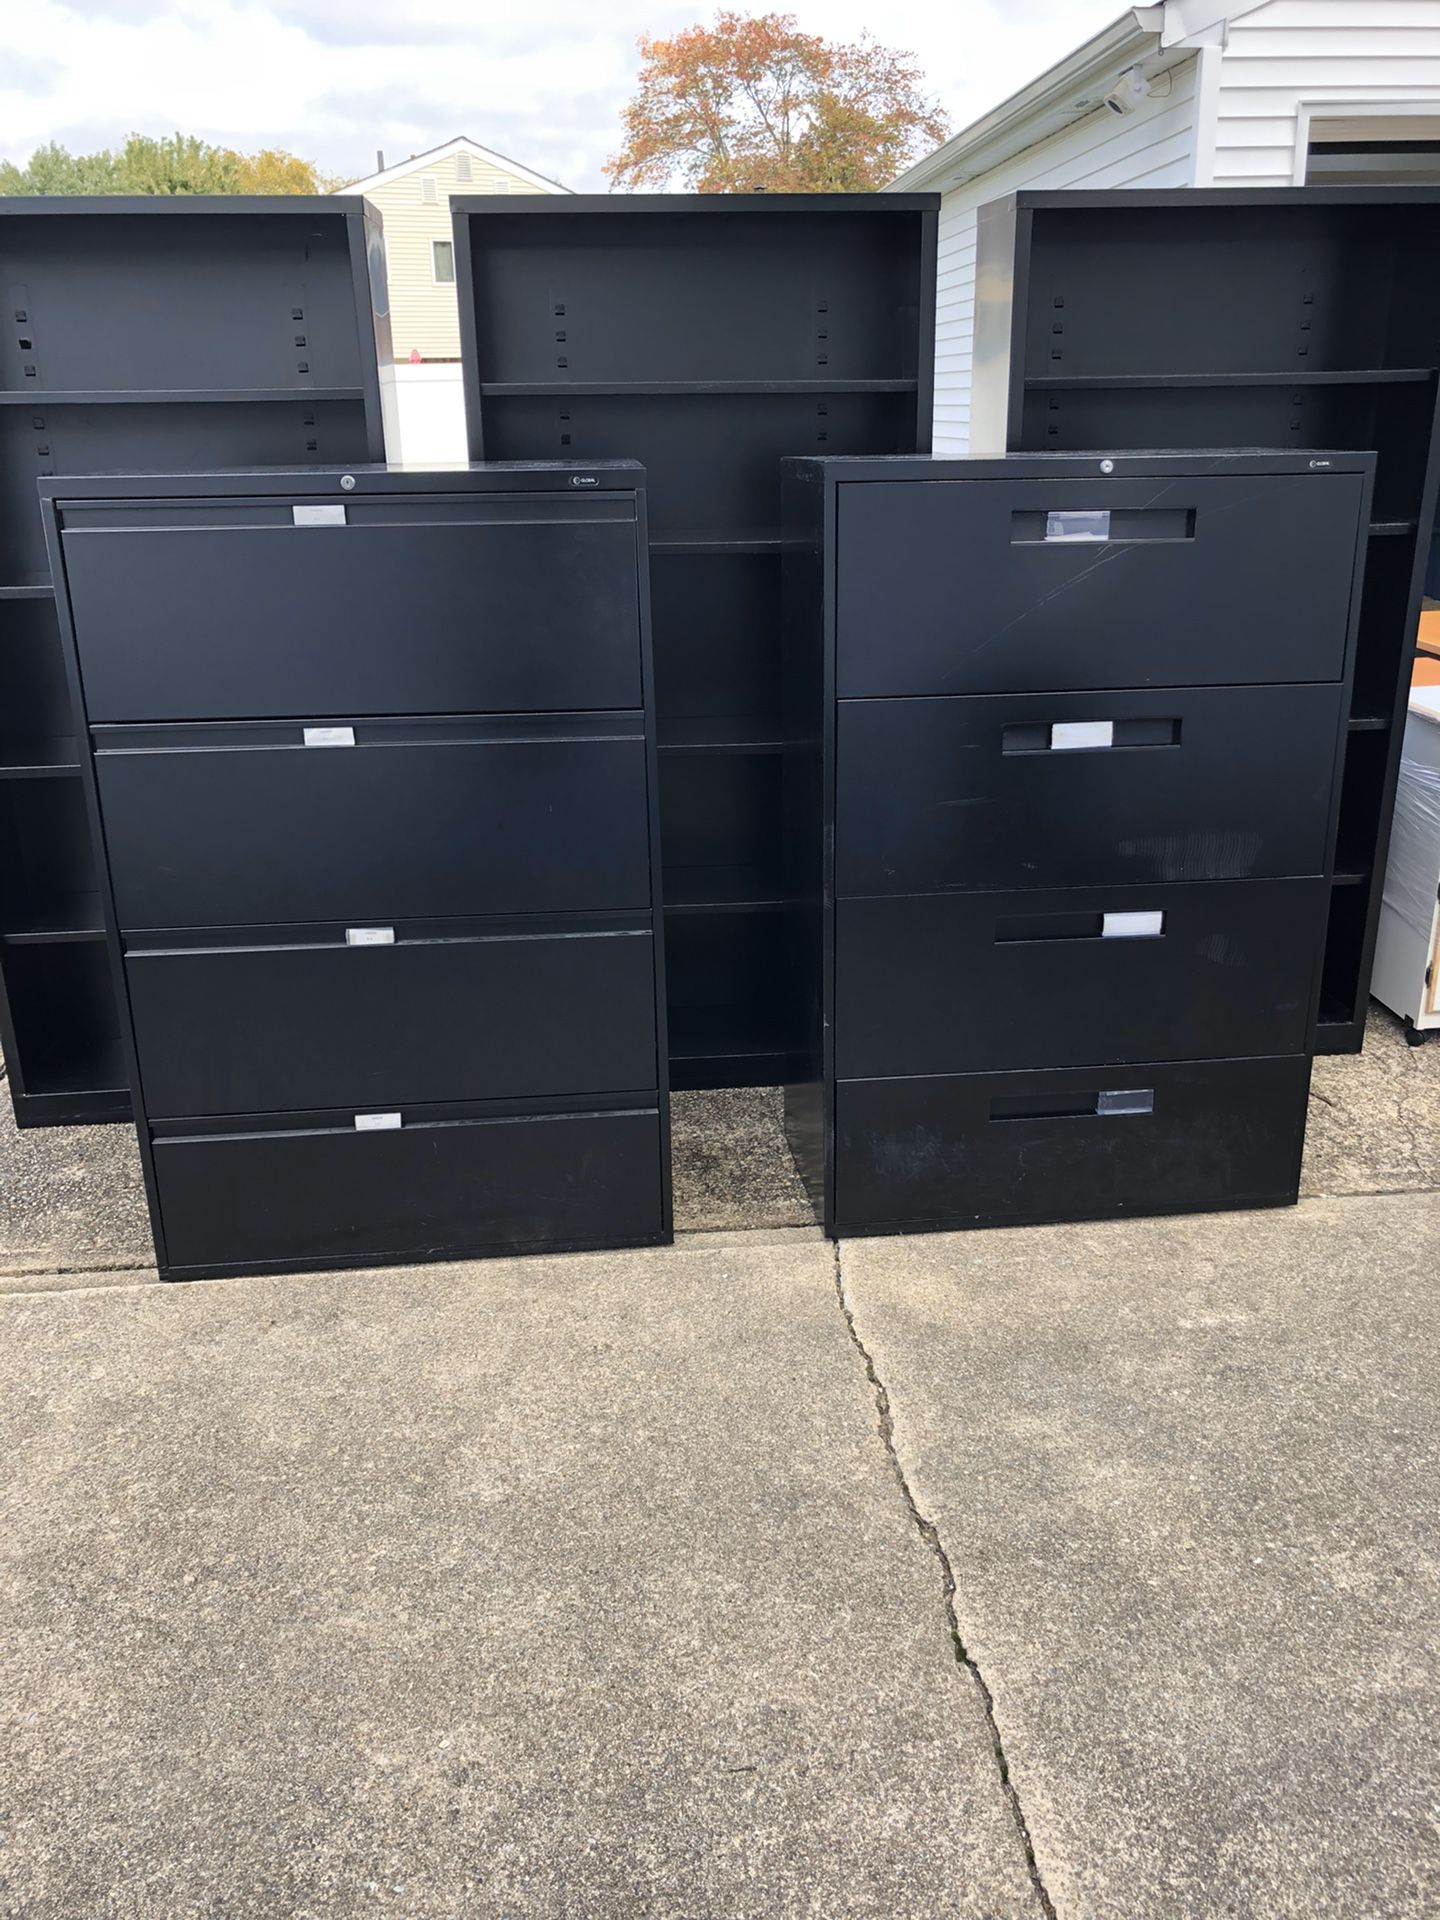 Lateral file cabinets